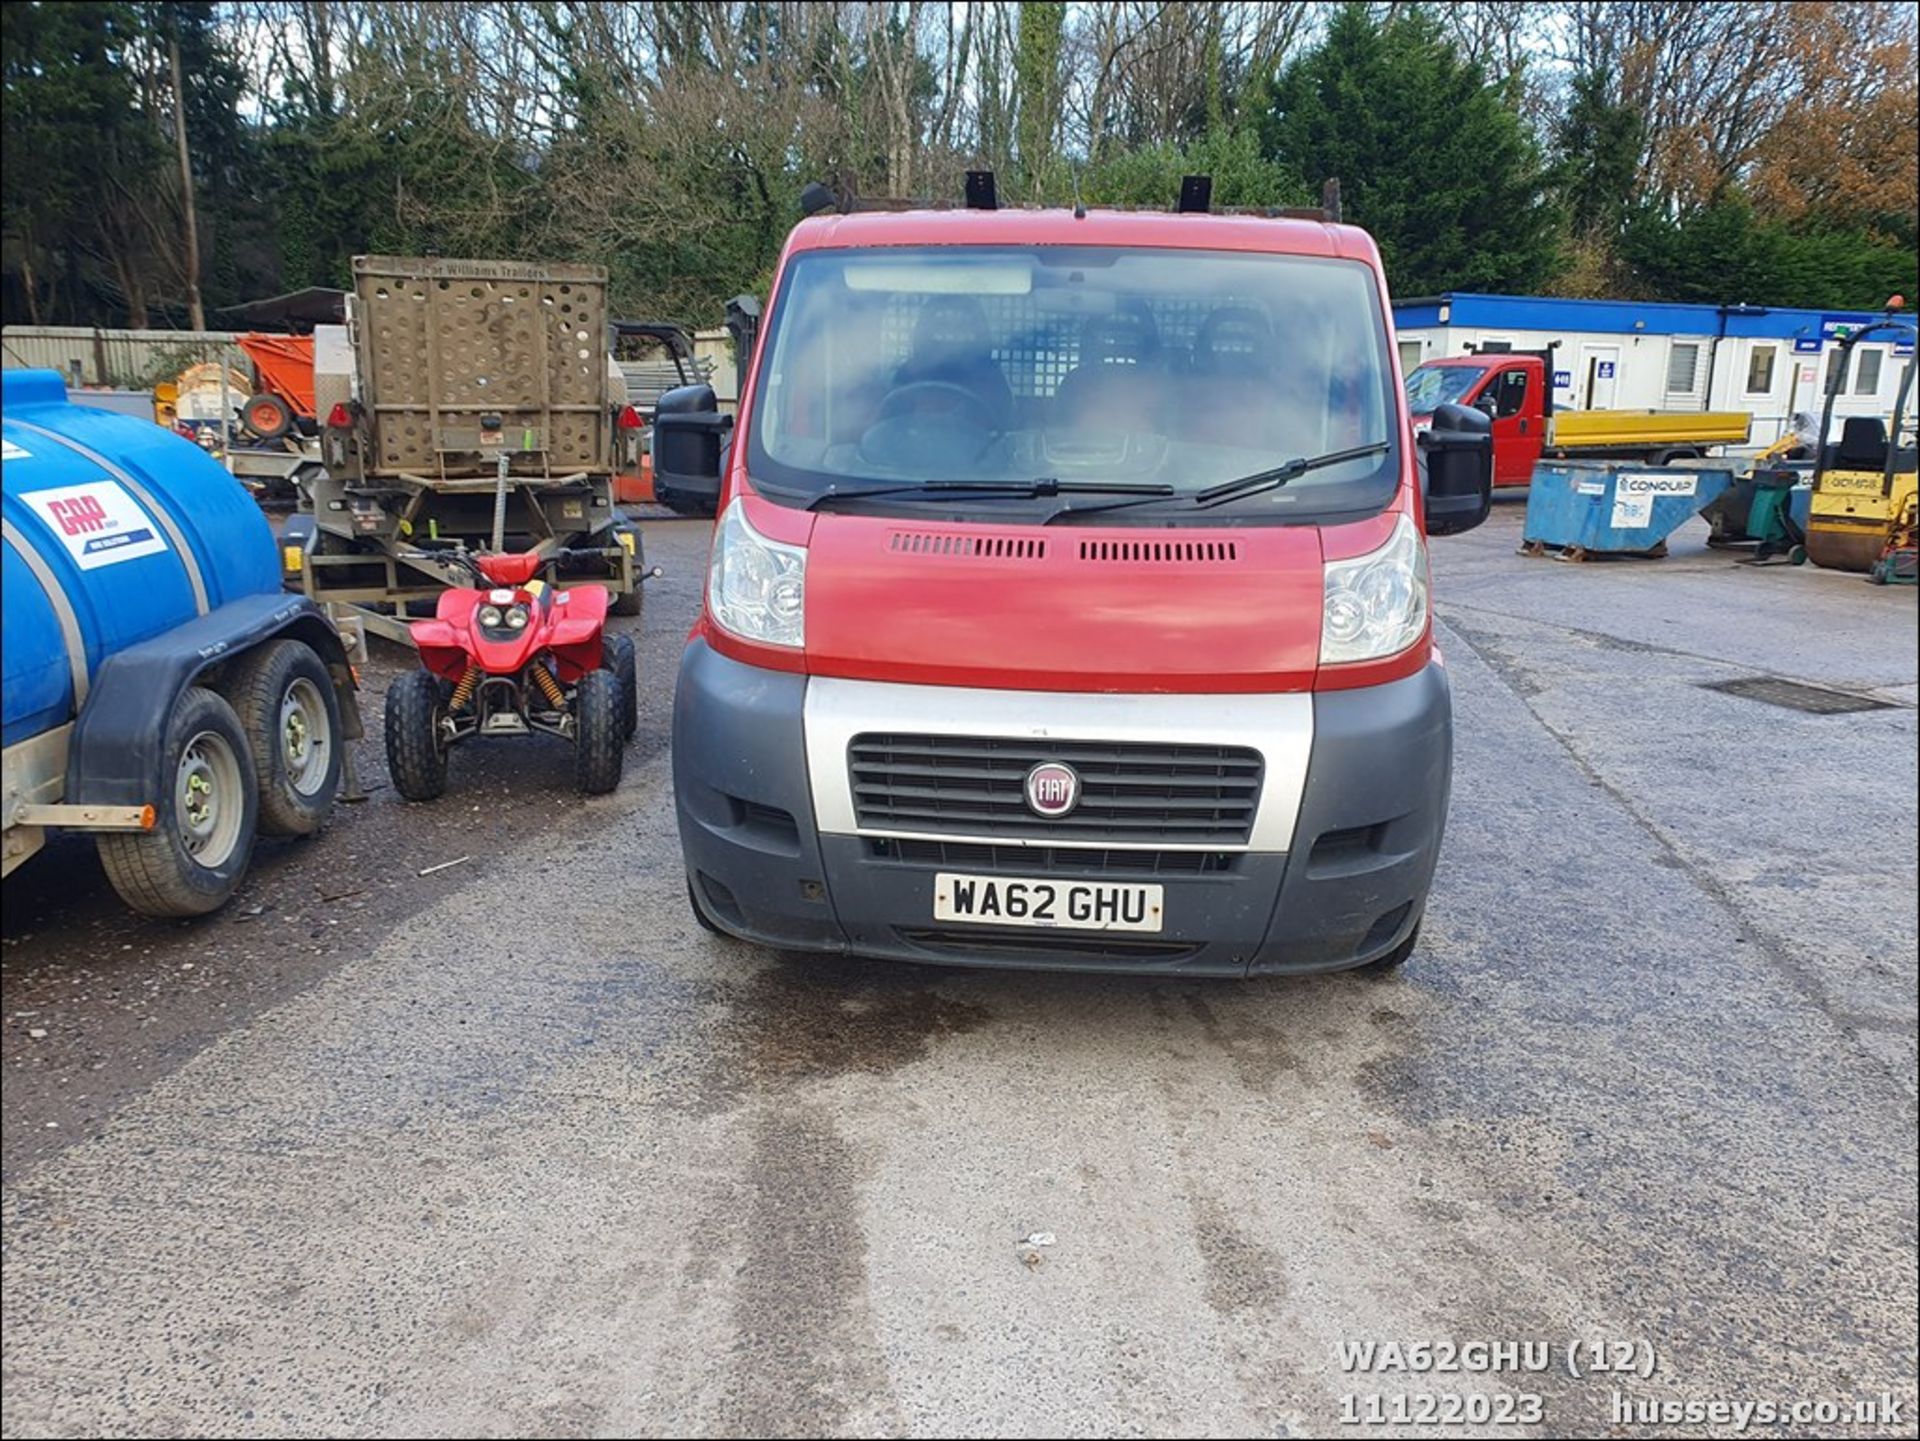 12/62 FIAT DUCATO 35 MULTIJET - 2287cc 2.dr Flat Bed (Red) - Image 13 of 45